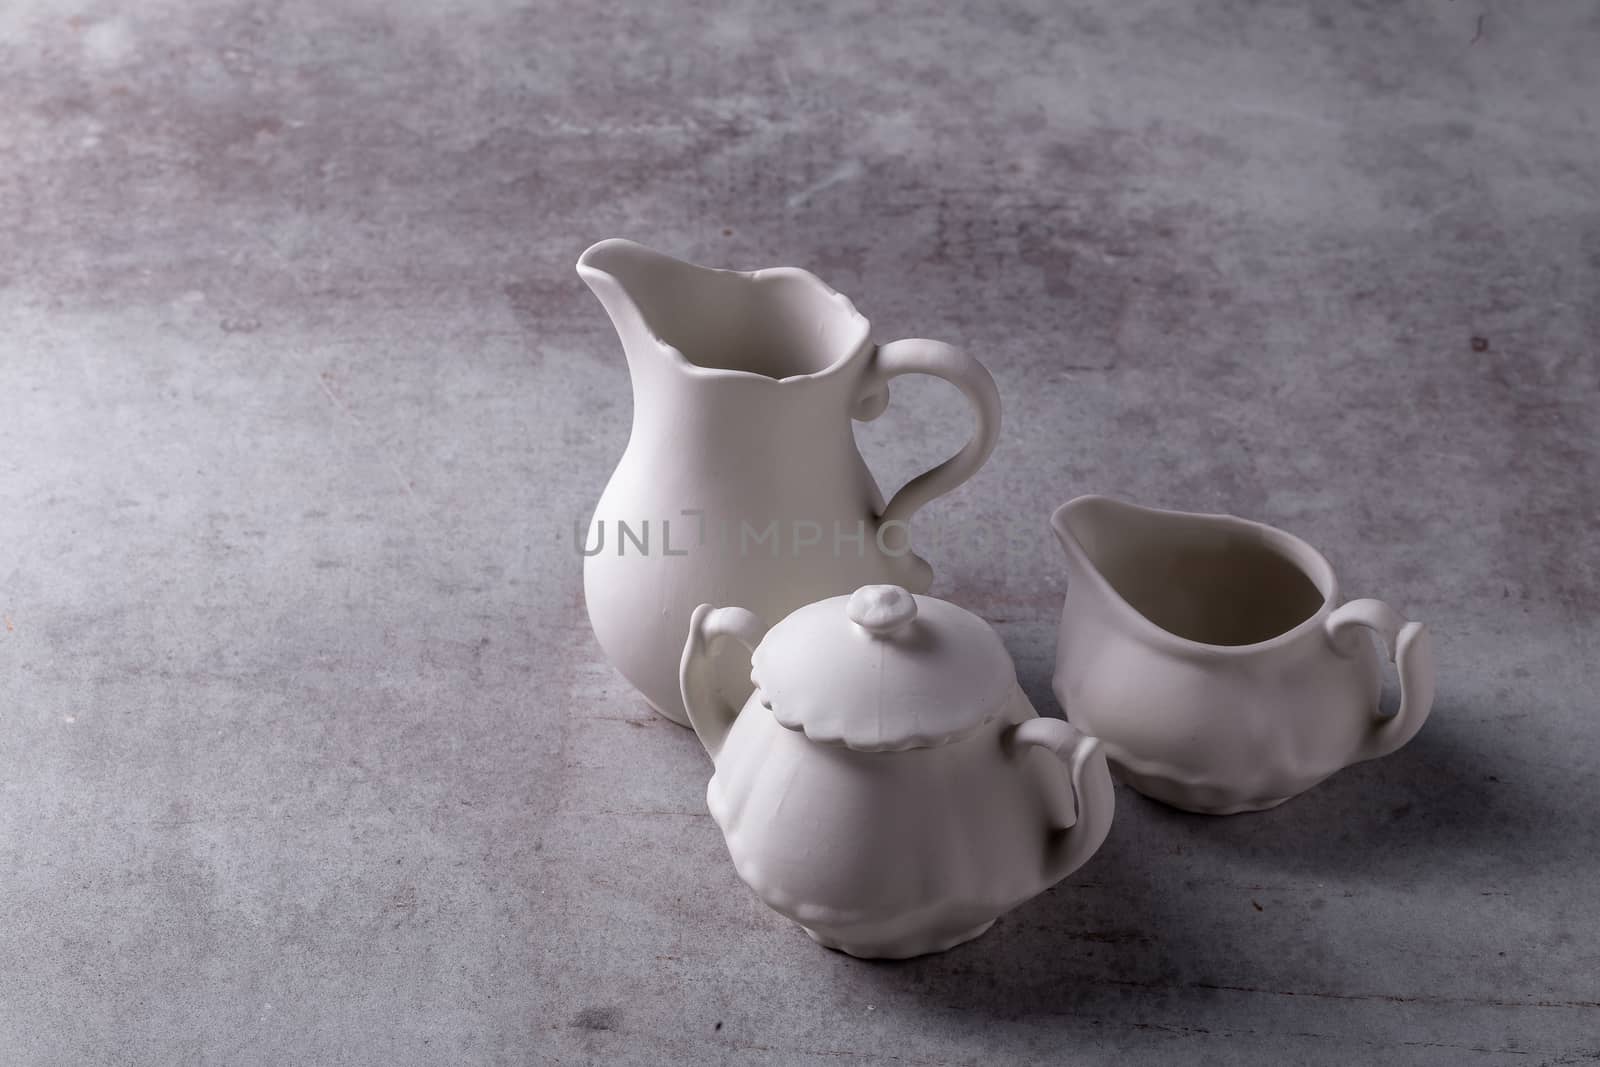 Teapot creamer, Cup and saucer on Cement Board by kaiskynet